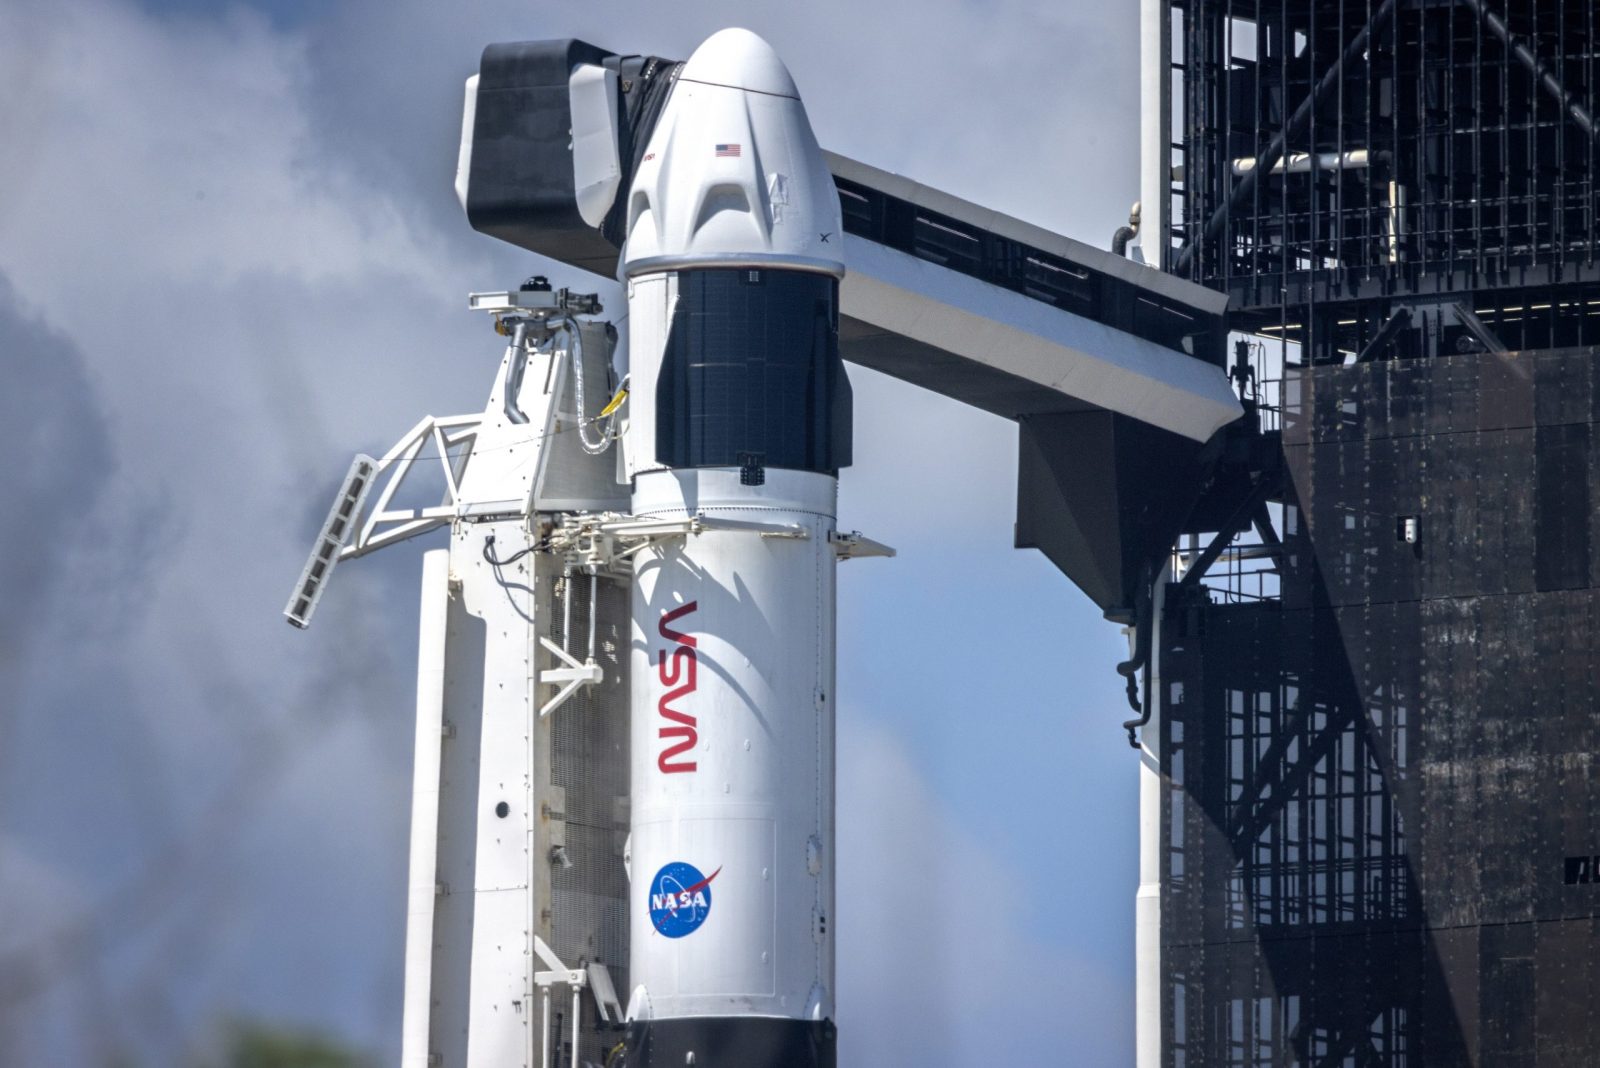 epa10820017 The SpaceX Falcon 9 rocket with the company's Dragon spacecraft onboard on the launch pad at Launch Complex 39A as preparations continue for the Crew-7 mission at NASA's Kennedy Space Center in Florida, USA, 25 August 2023. According to NASA, NASA and SpaceX are standing down from the 25 August launch opportunity for the agency’s Crew-7 mission to the International Space Station. Launch now is targeted at 3:27 a.m. Saturday, 26 August, for SpaceX’s seventh crew rotation mission to the microgravity laboratory for NASA. The Crew 7 mission members are NASA astronaut Jasmin Moghbeli, commander, Roscosmos cosmonaut Konstantin Borisov, mission specialist, ESA (European Space Agency) astronaut Andreas Mogensen, pilot, and JAXA (Japan Aerospace Exploration Agency) astronaut Satoshi Furukawa, mission specialist.  EPA/CRISTOBAL HERRERA-ULASHKEVICH